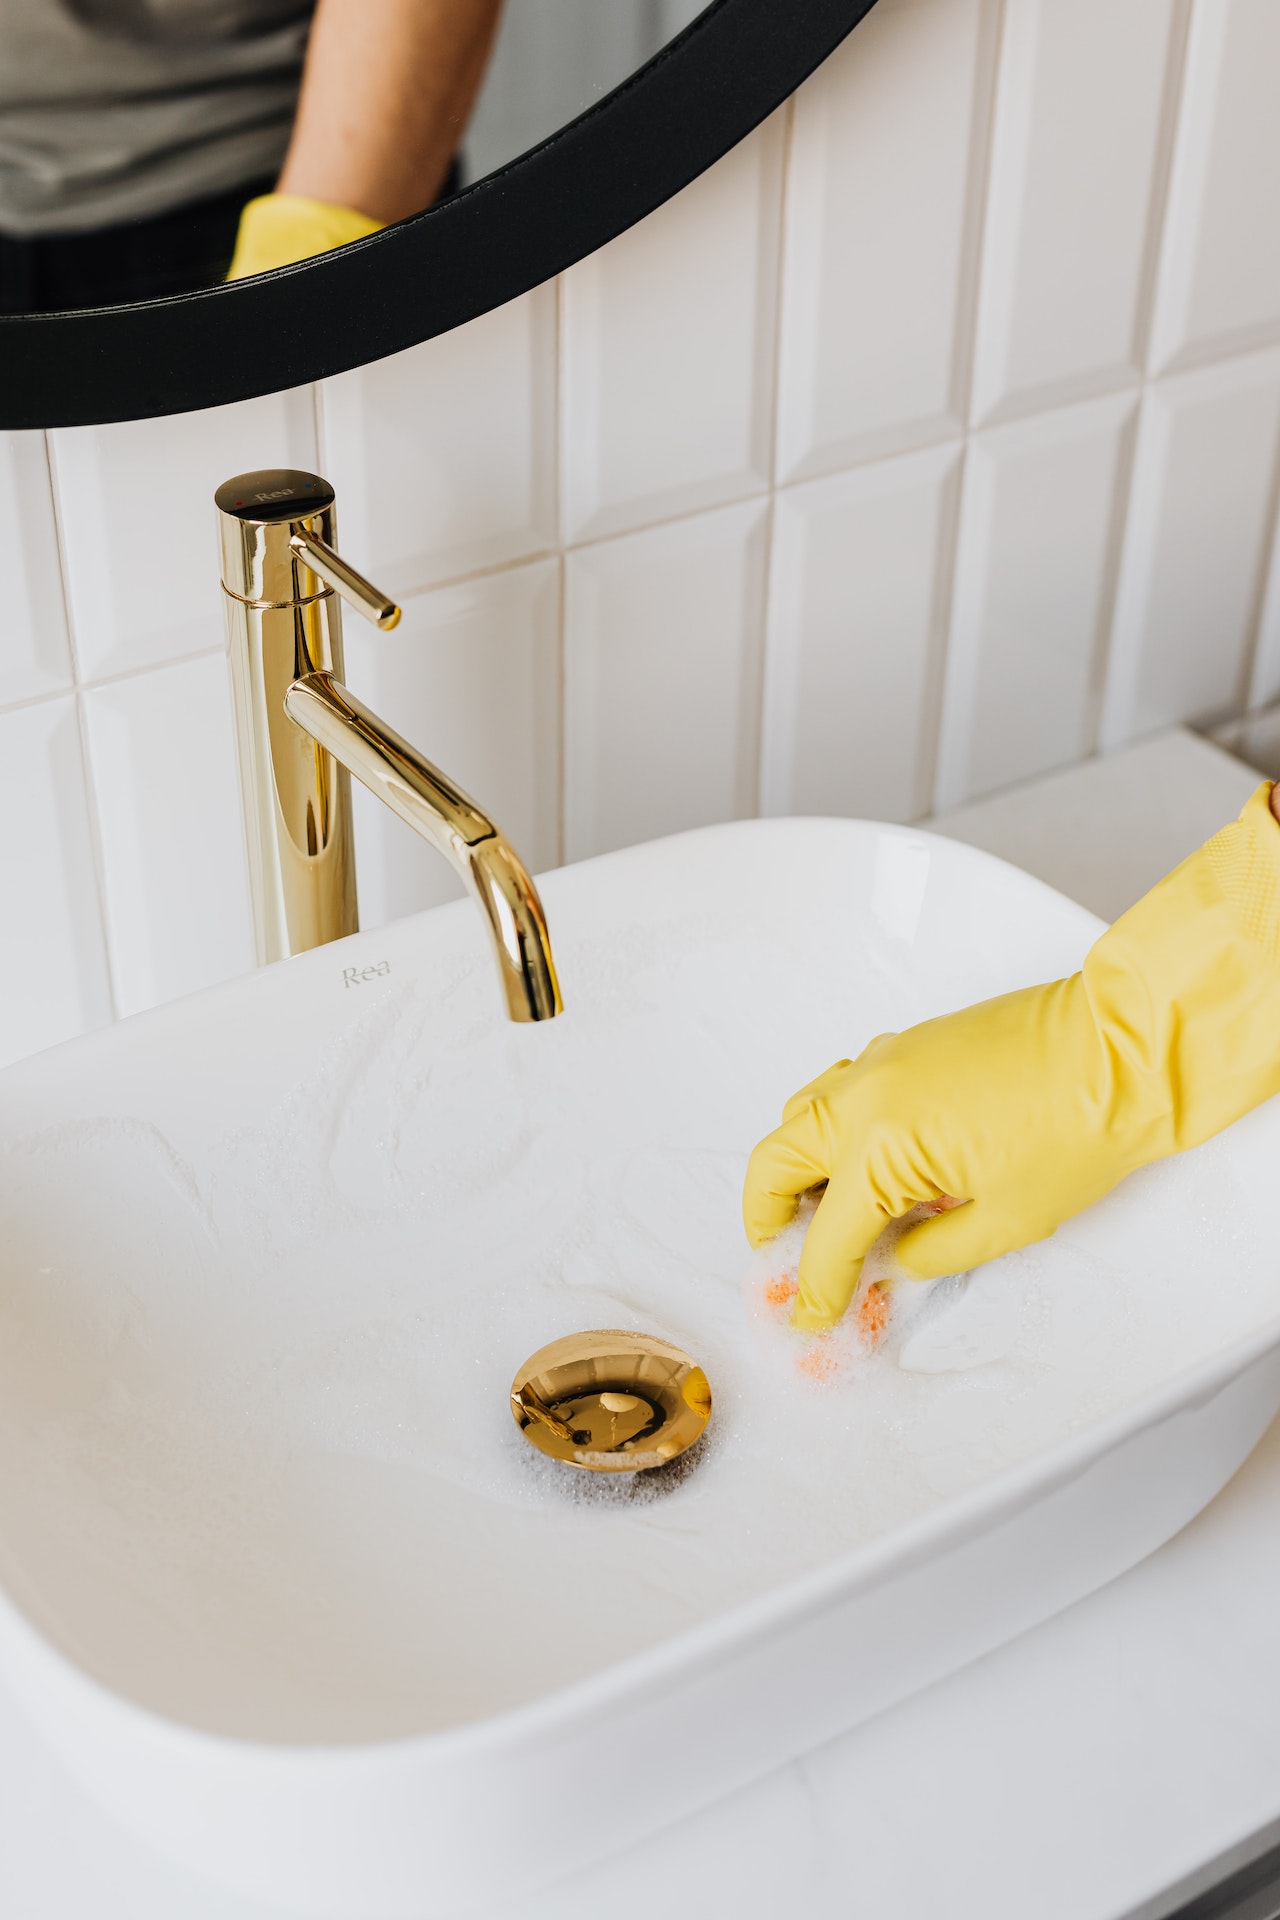 Brilliance Cleaning Services - London's Domestic Cleaning Experts